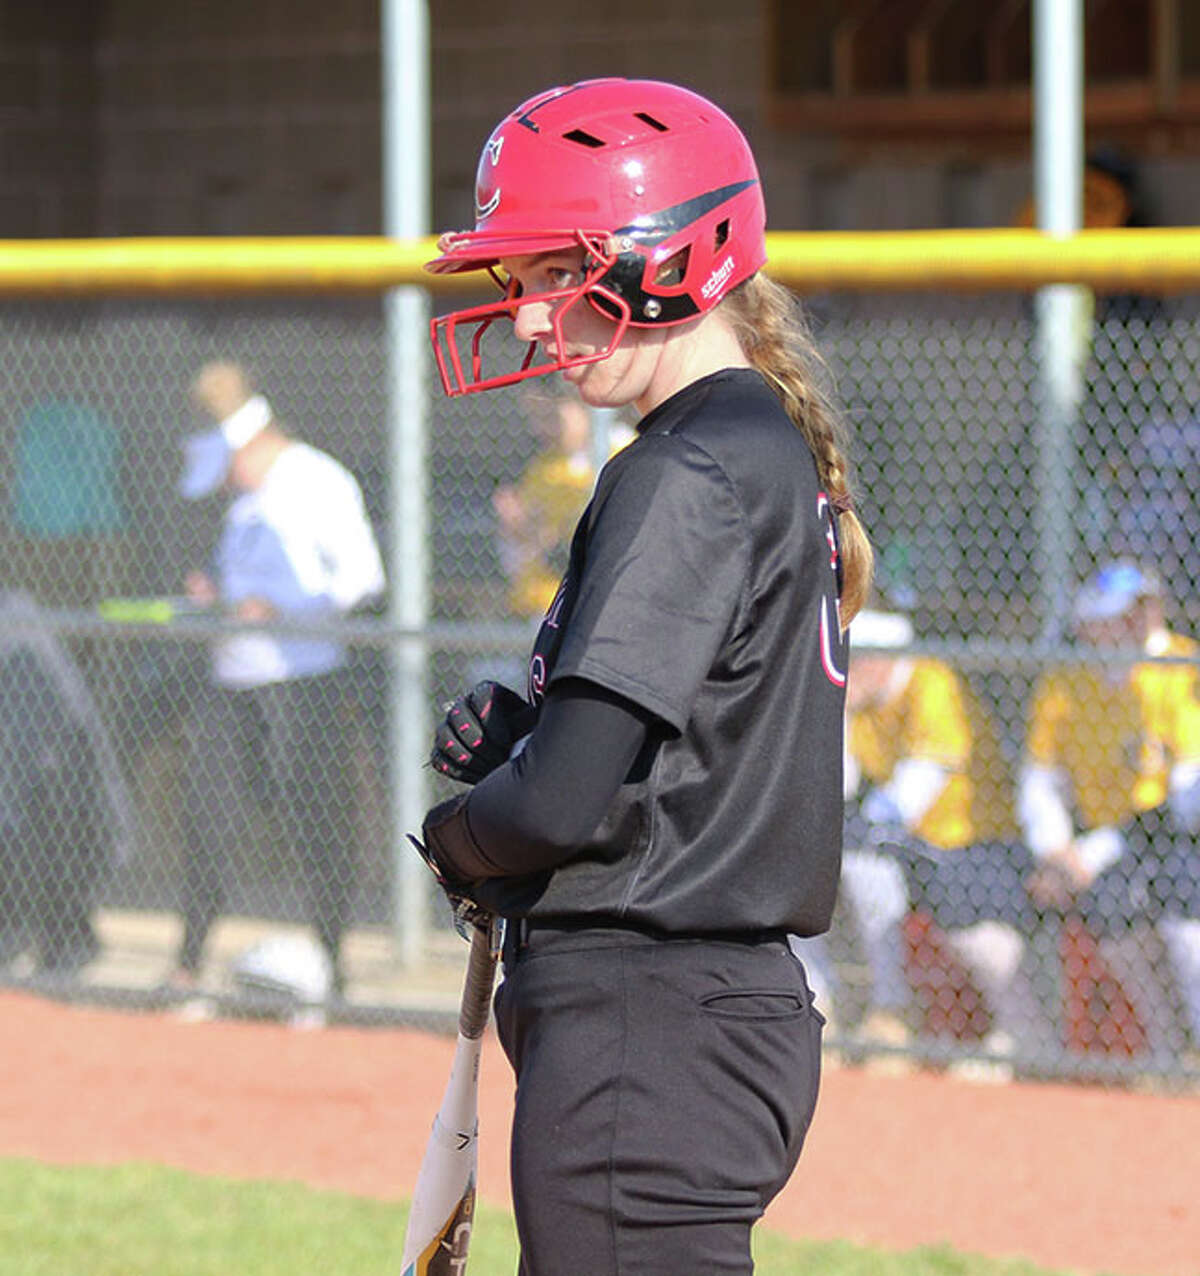 Calhoun's Gracie Klaas Gracie Klaas had three hits, including a home run, in the Warriors' win over Greenfield-Northwestern Thursday.